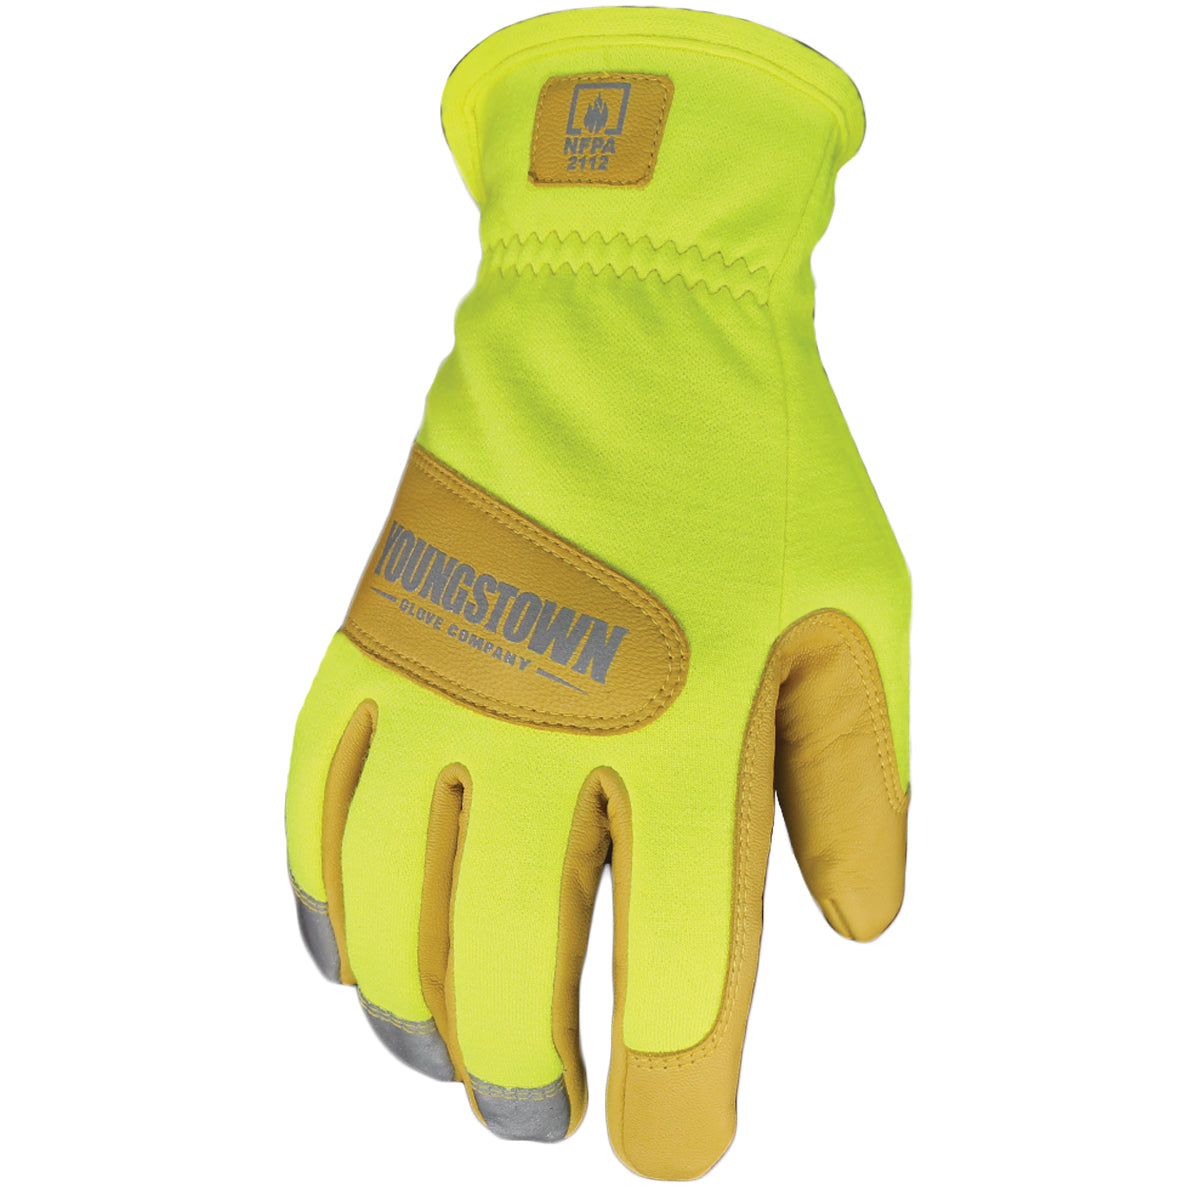 G & F Products High Visibility Reflective Mechanics Work Gloves